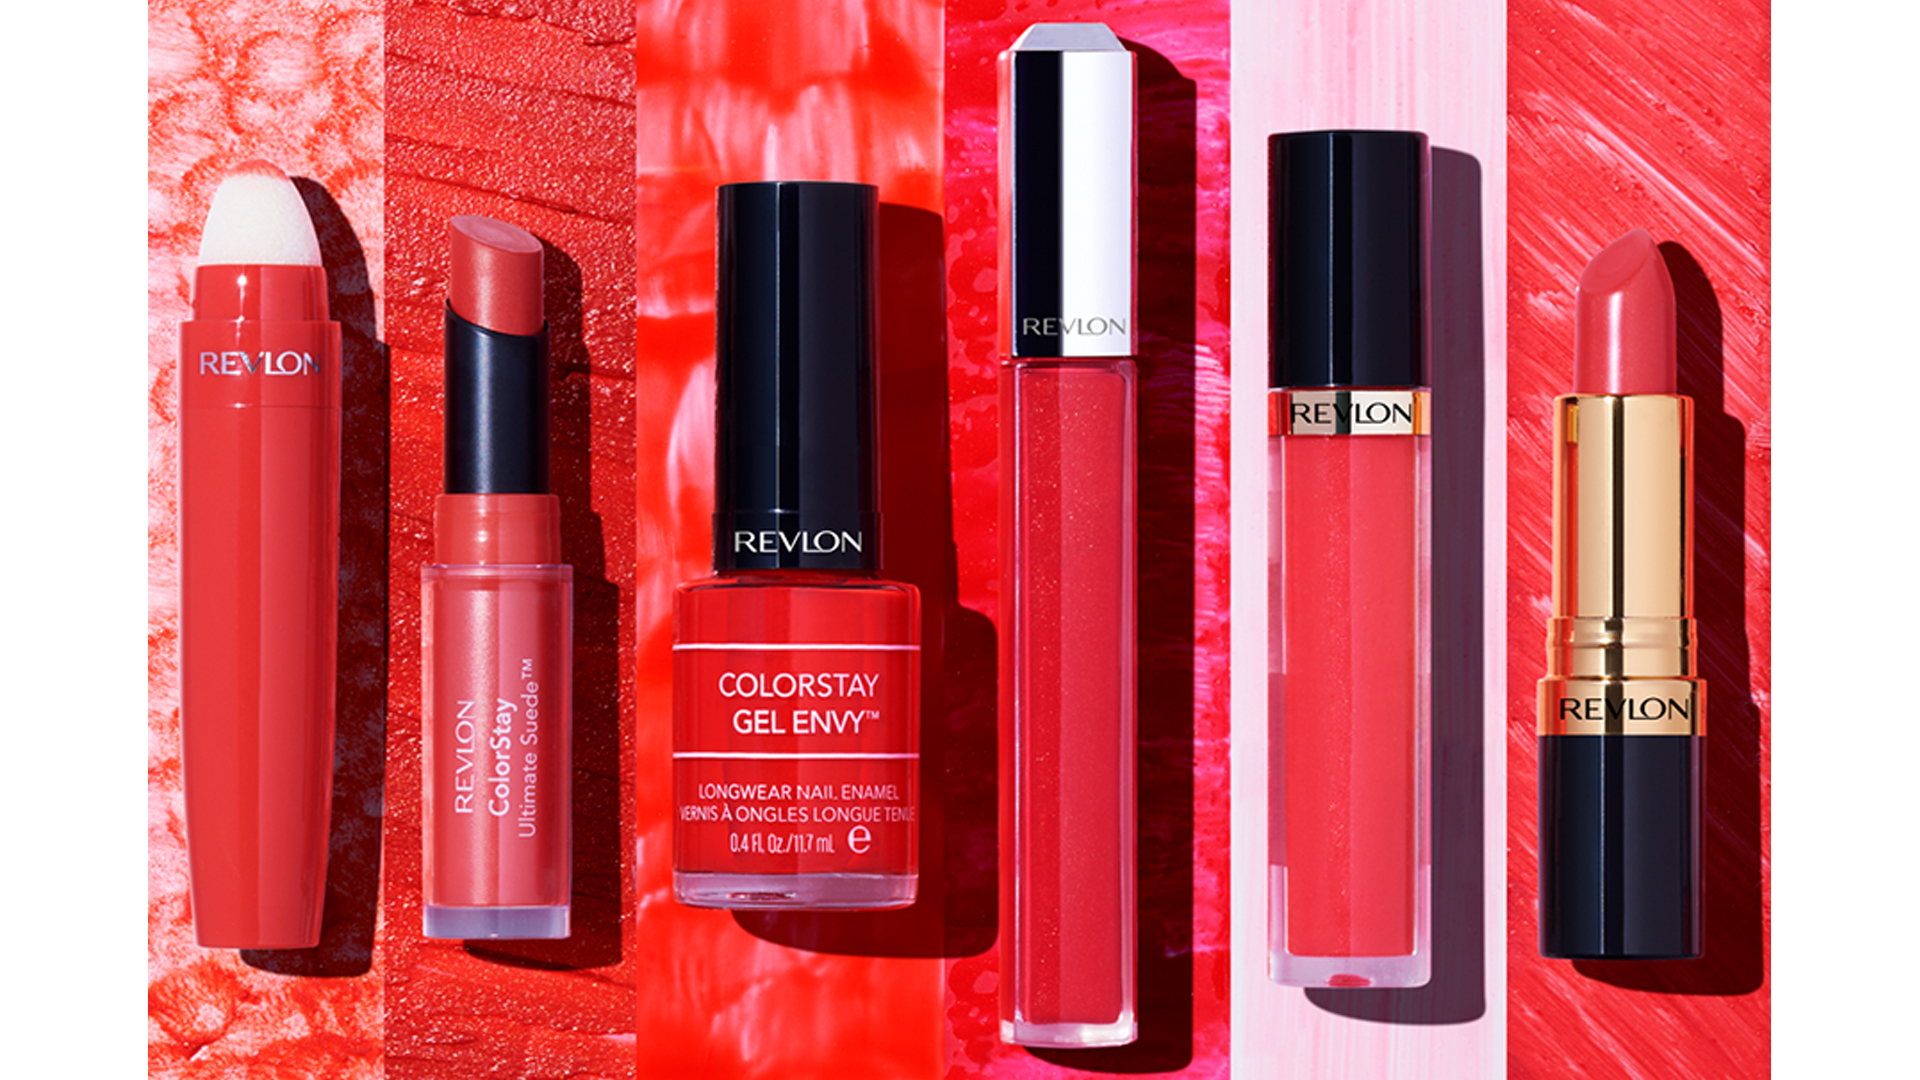 Revlon group product shot on red backgrounds